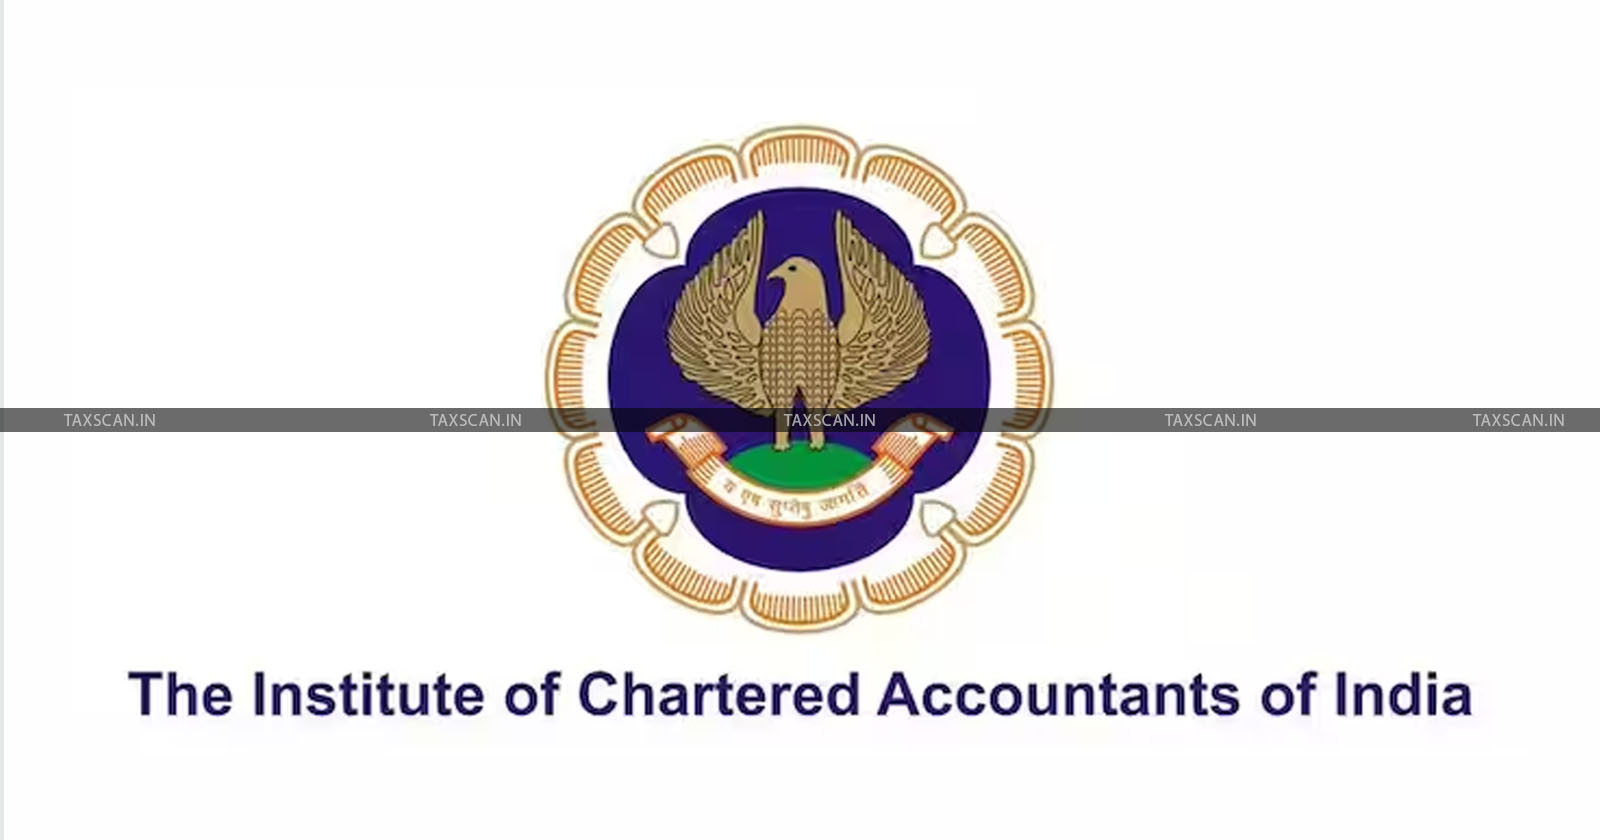 ICAI - Members of Foreign Accounting Bodies - Mutual Recognition Agreements - Memorandum of Understanding - taxscan